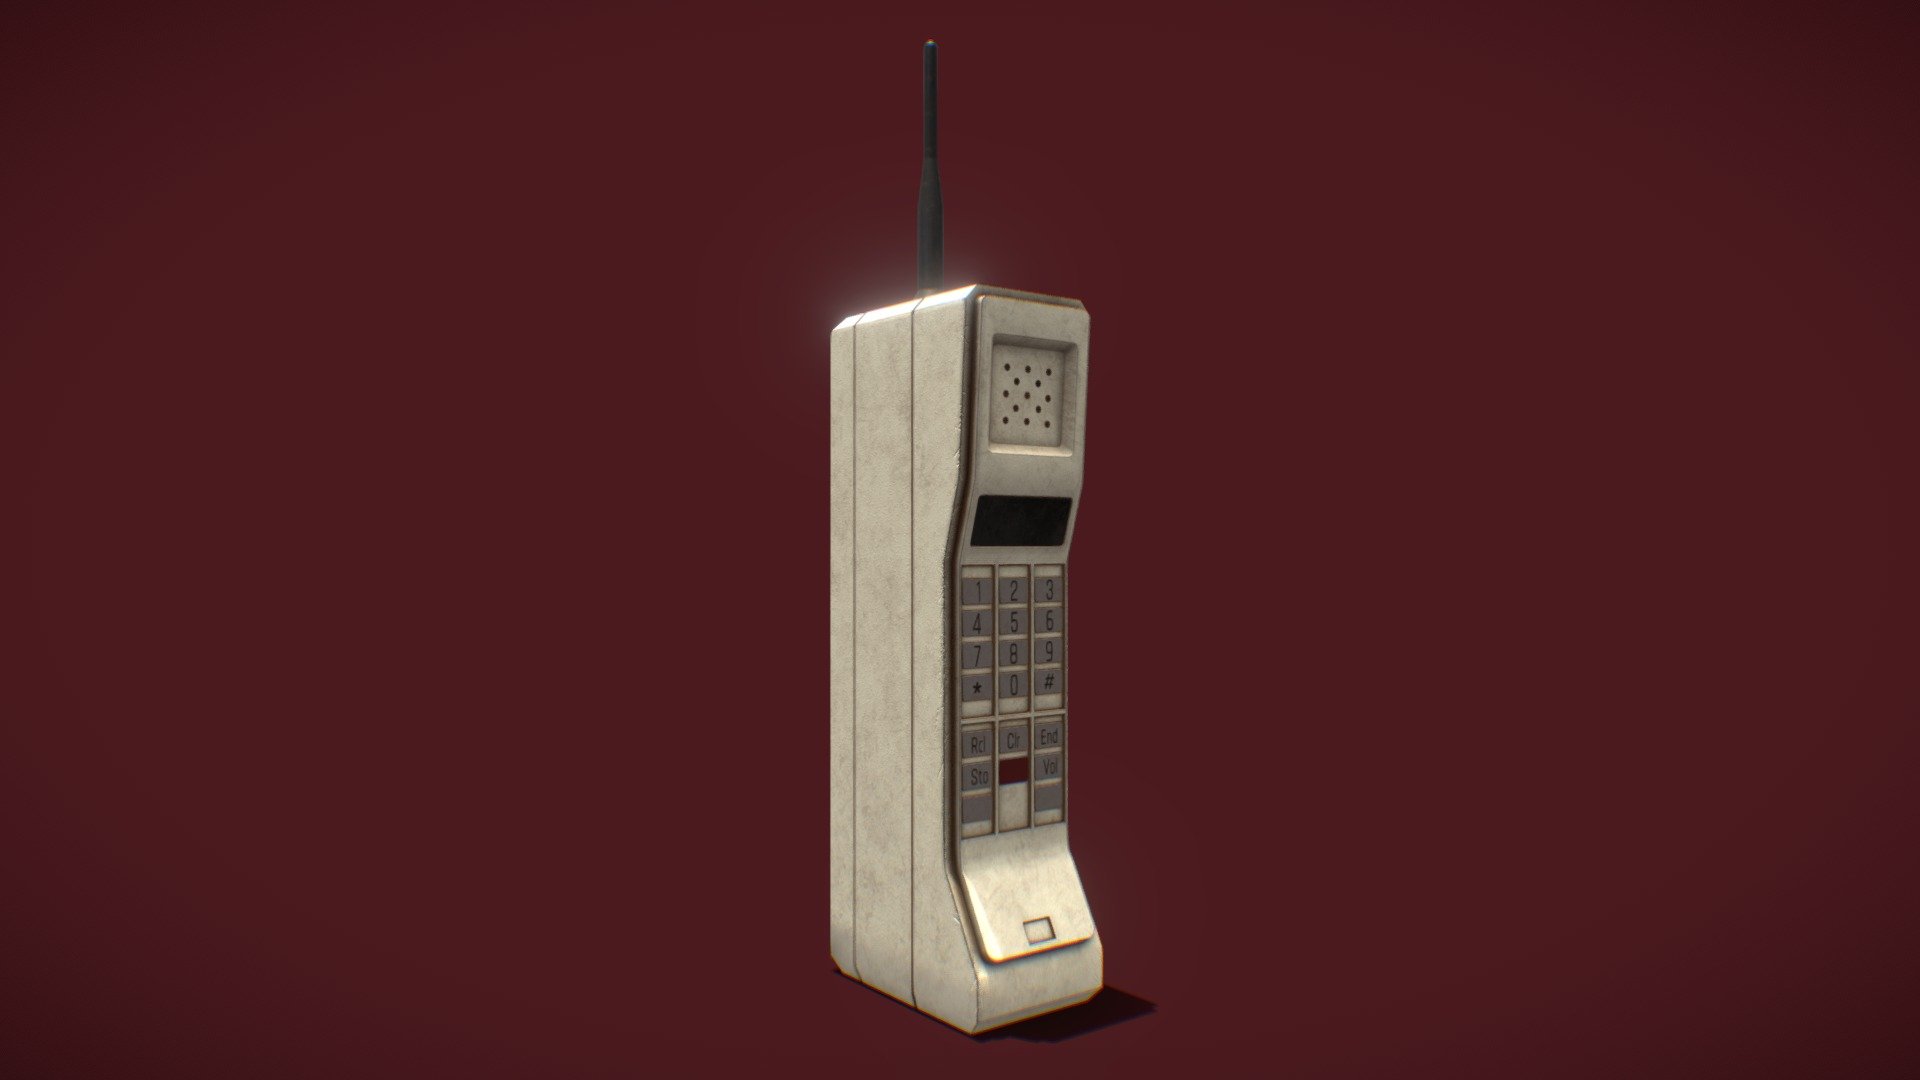 My first object made with blender + substance 3d painter.

Verts: 7.000
Textures in 4K - Old Mobile Phone - 3D model by VolpeDelDeserto 3d model